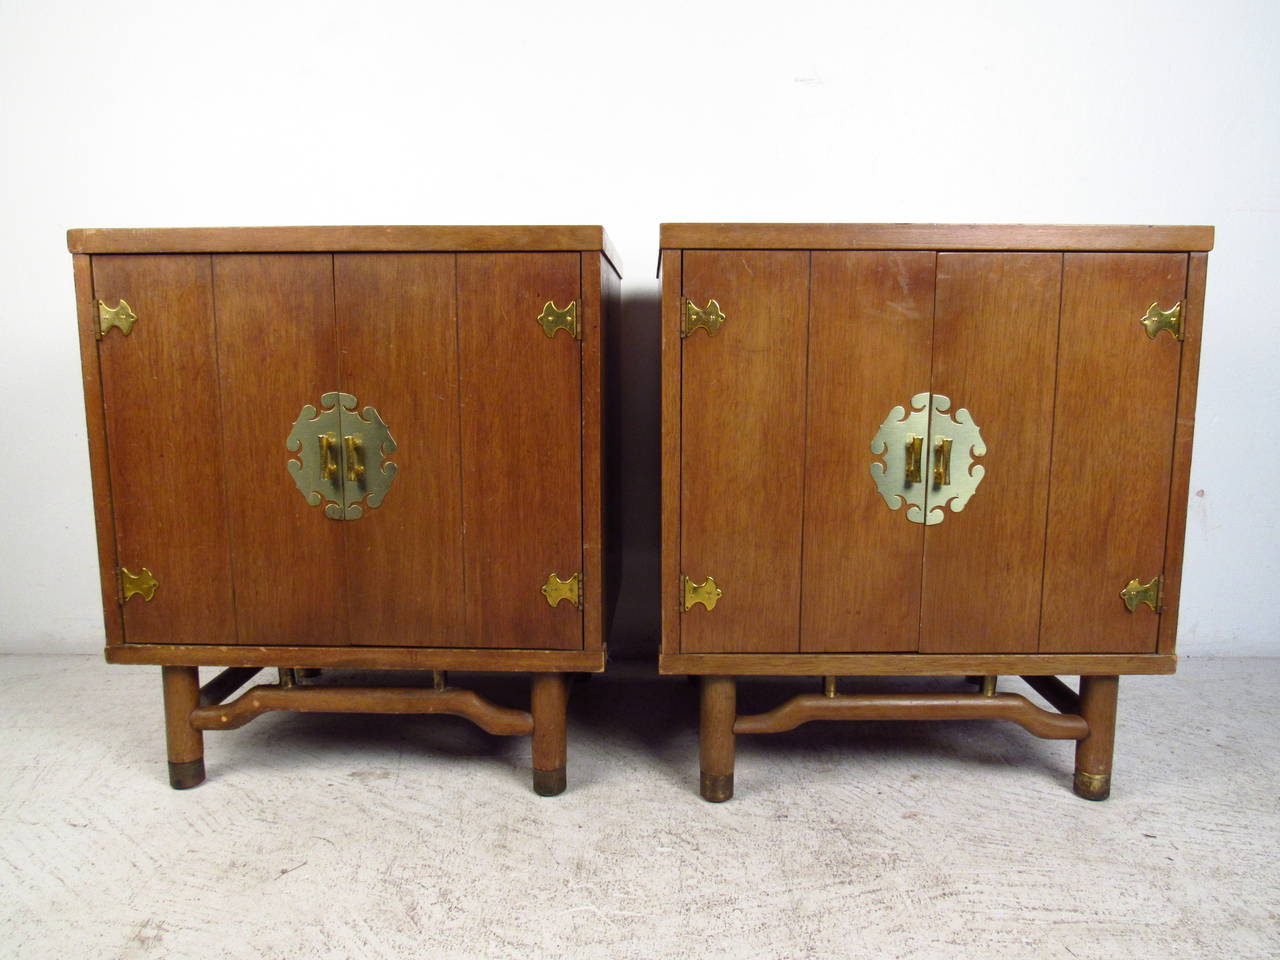 American Pair of Mid-Century Modern End Tables with Ornate Brass Hardware